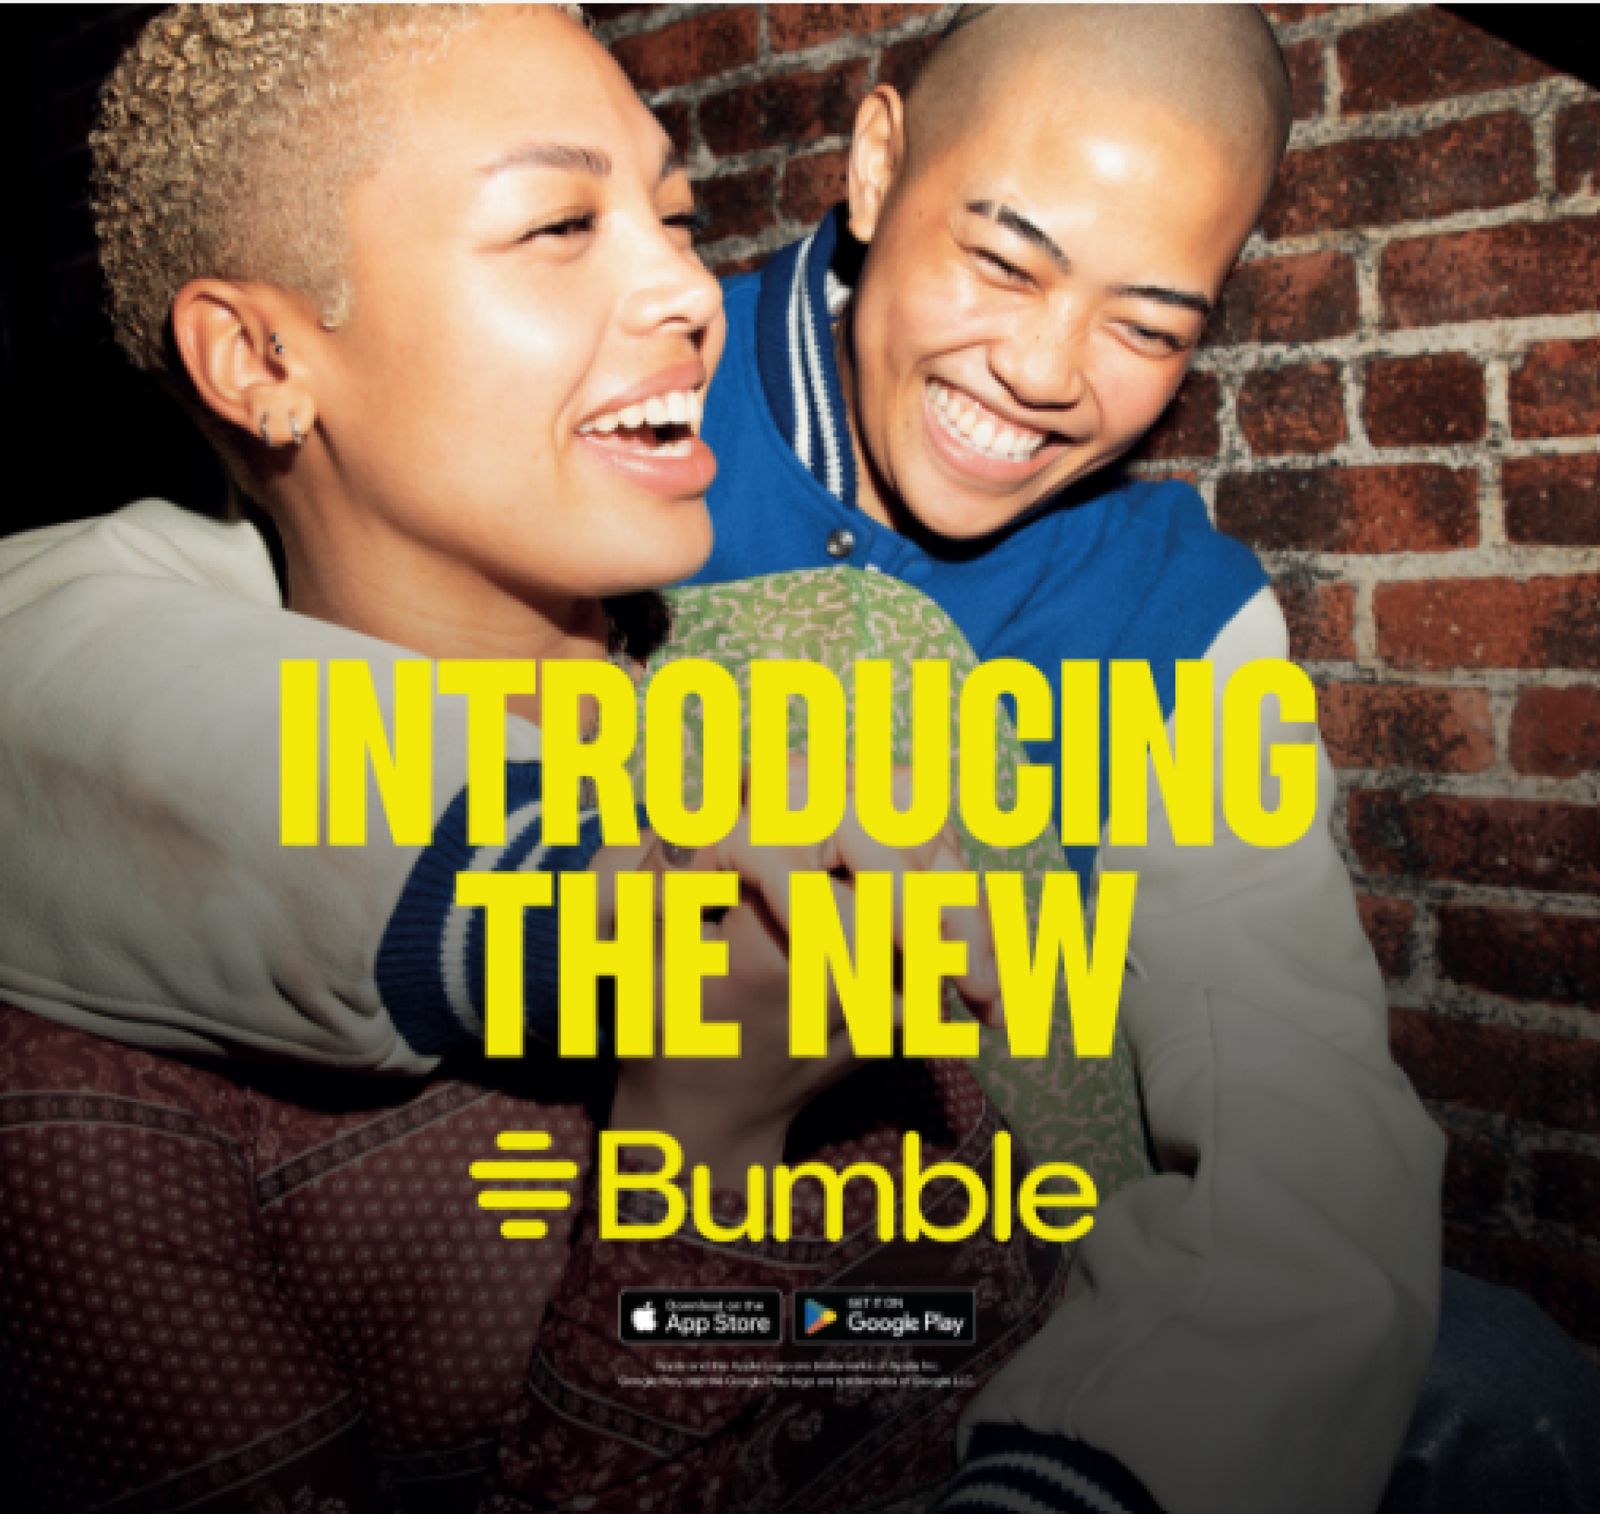 Bumble, the women-first dating app, today unveiled an updated brand identity and app design, and launched a suite of new features